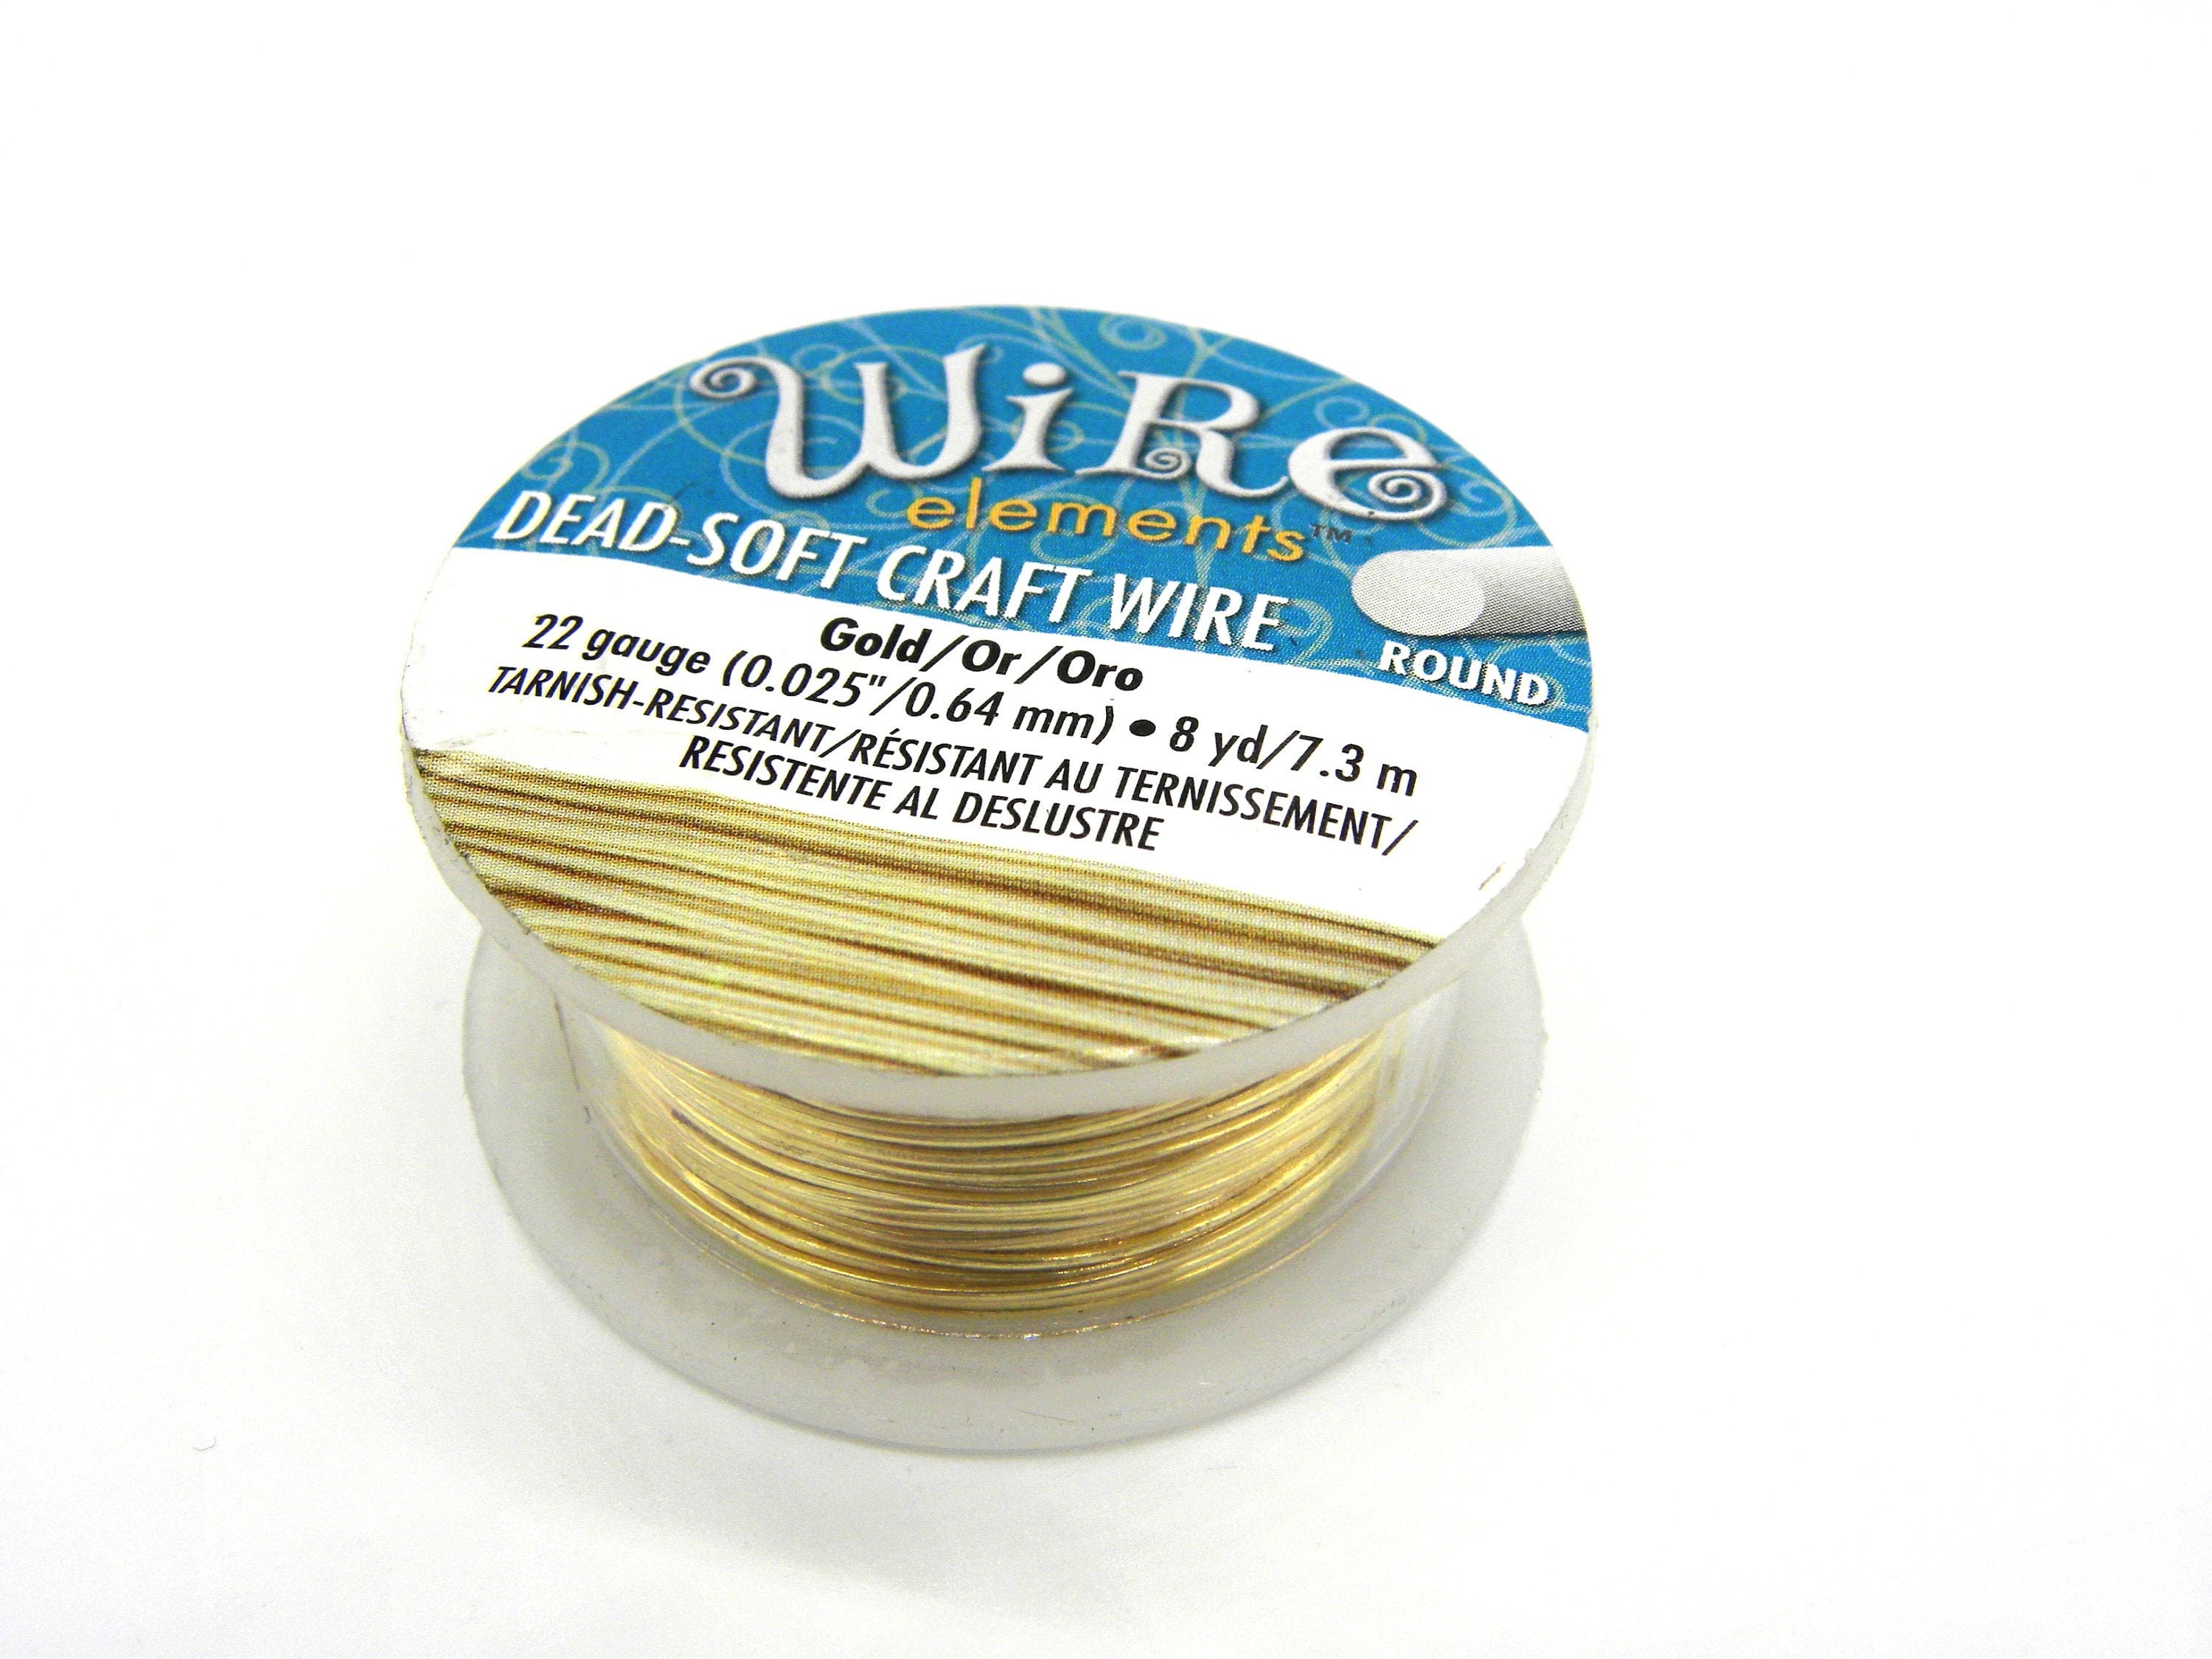 BeadSmith Craft Wire 26 Gauge GOLD PLATED